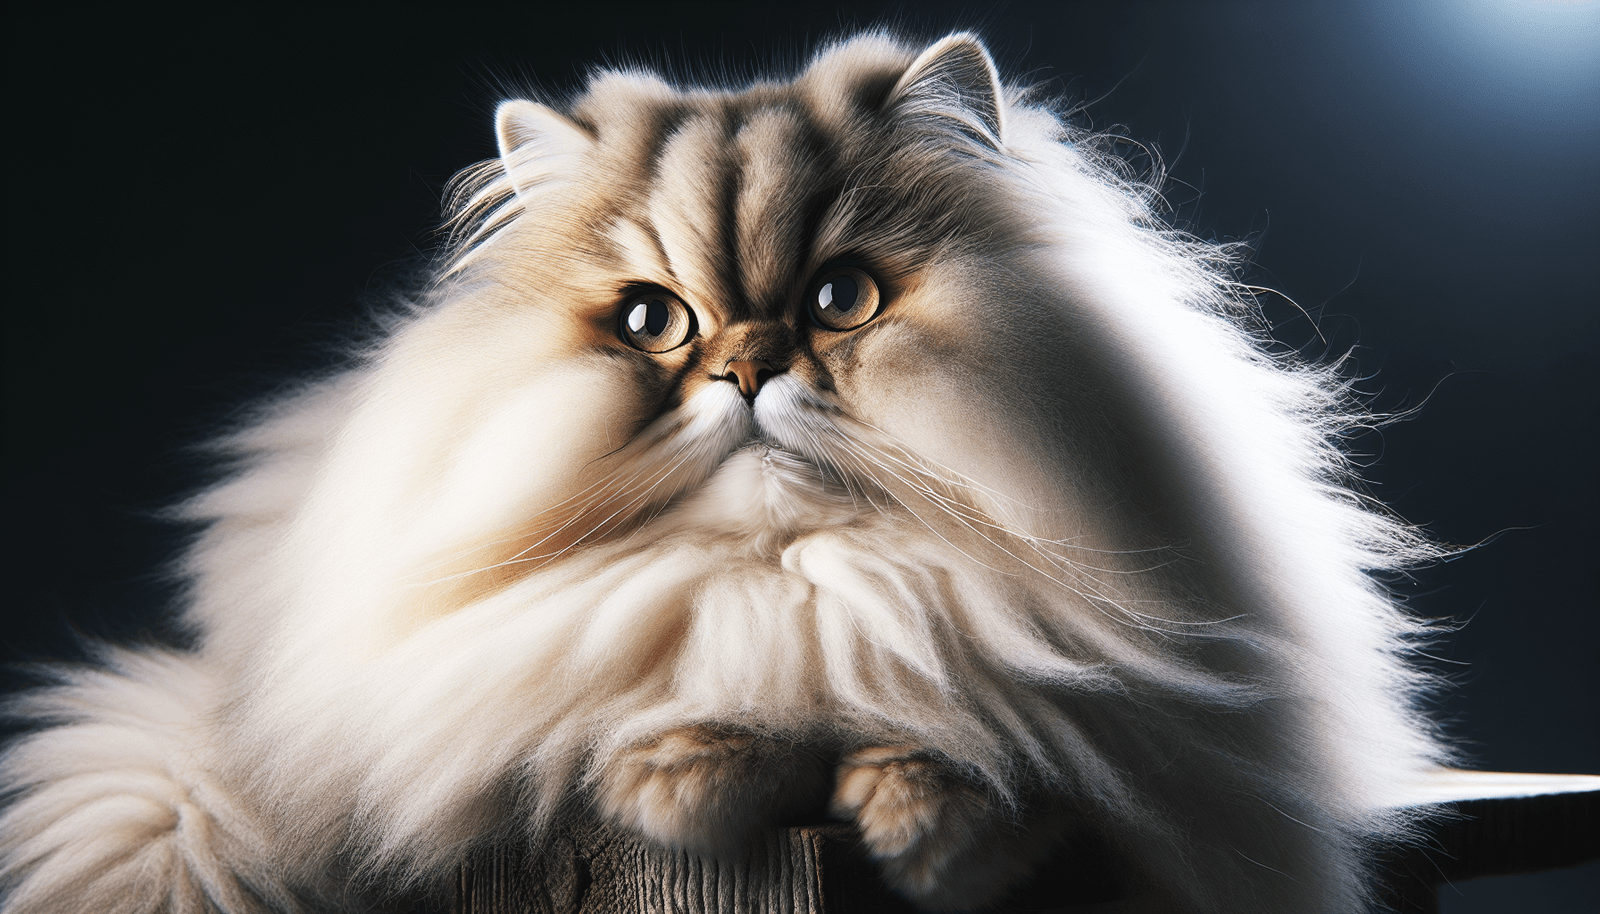 Best Places to Buy a Persian Cat in Berkeley